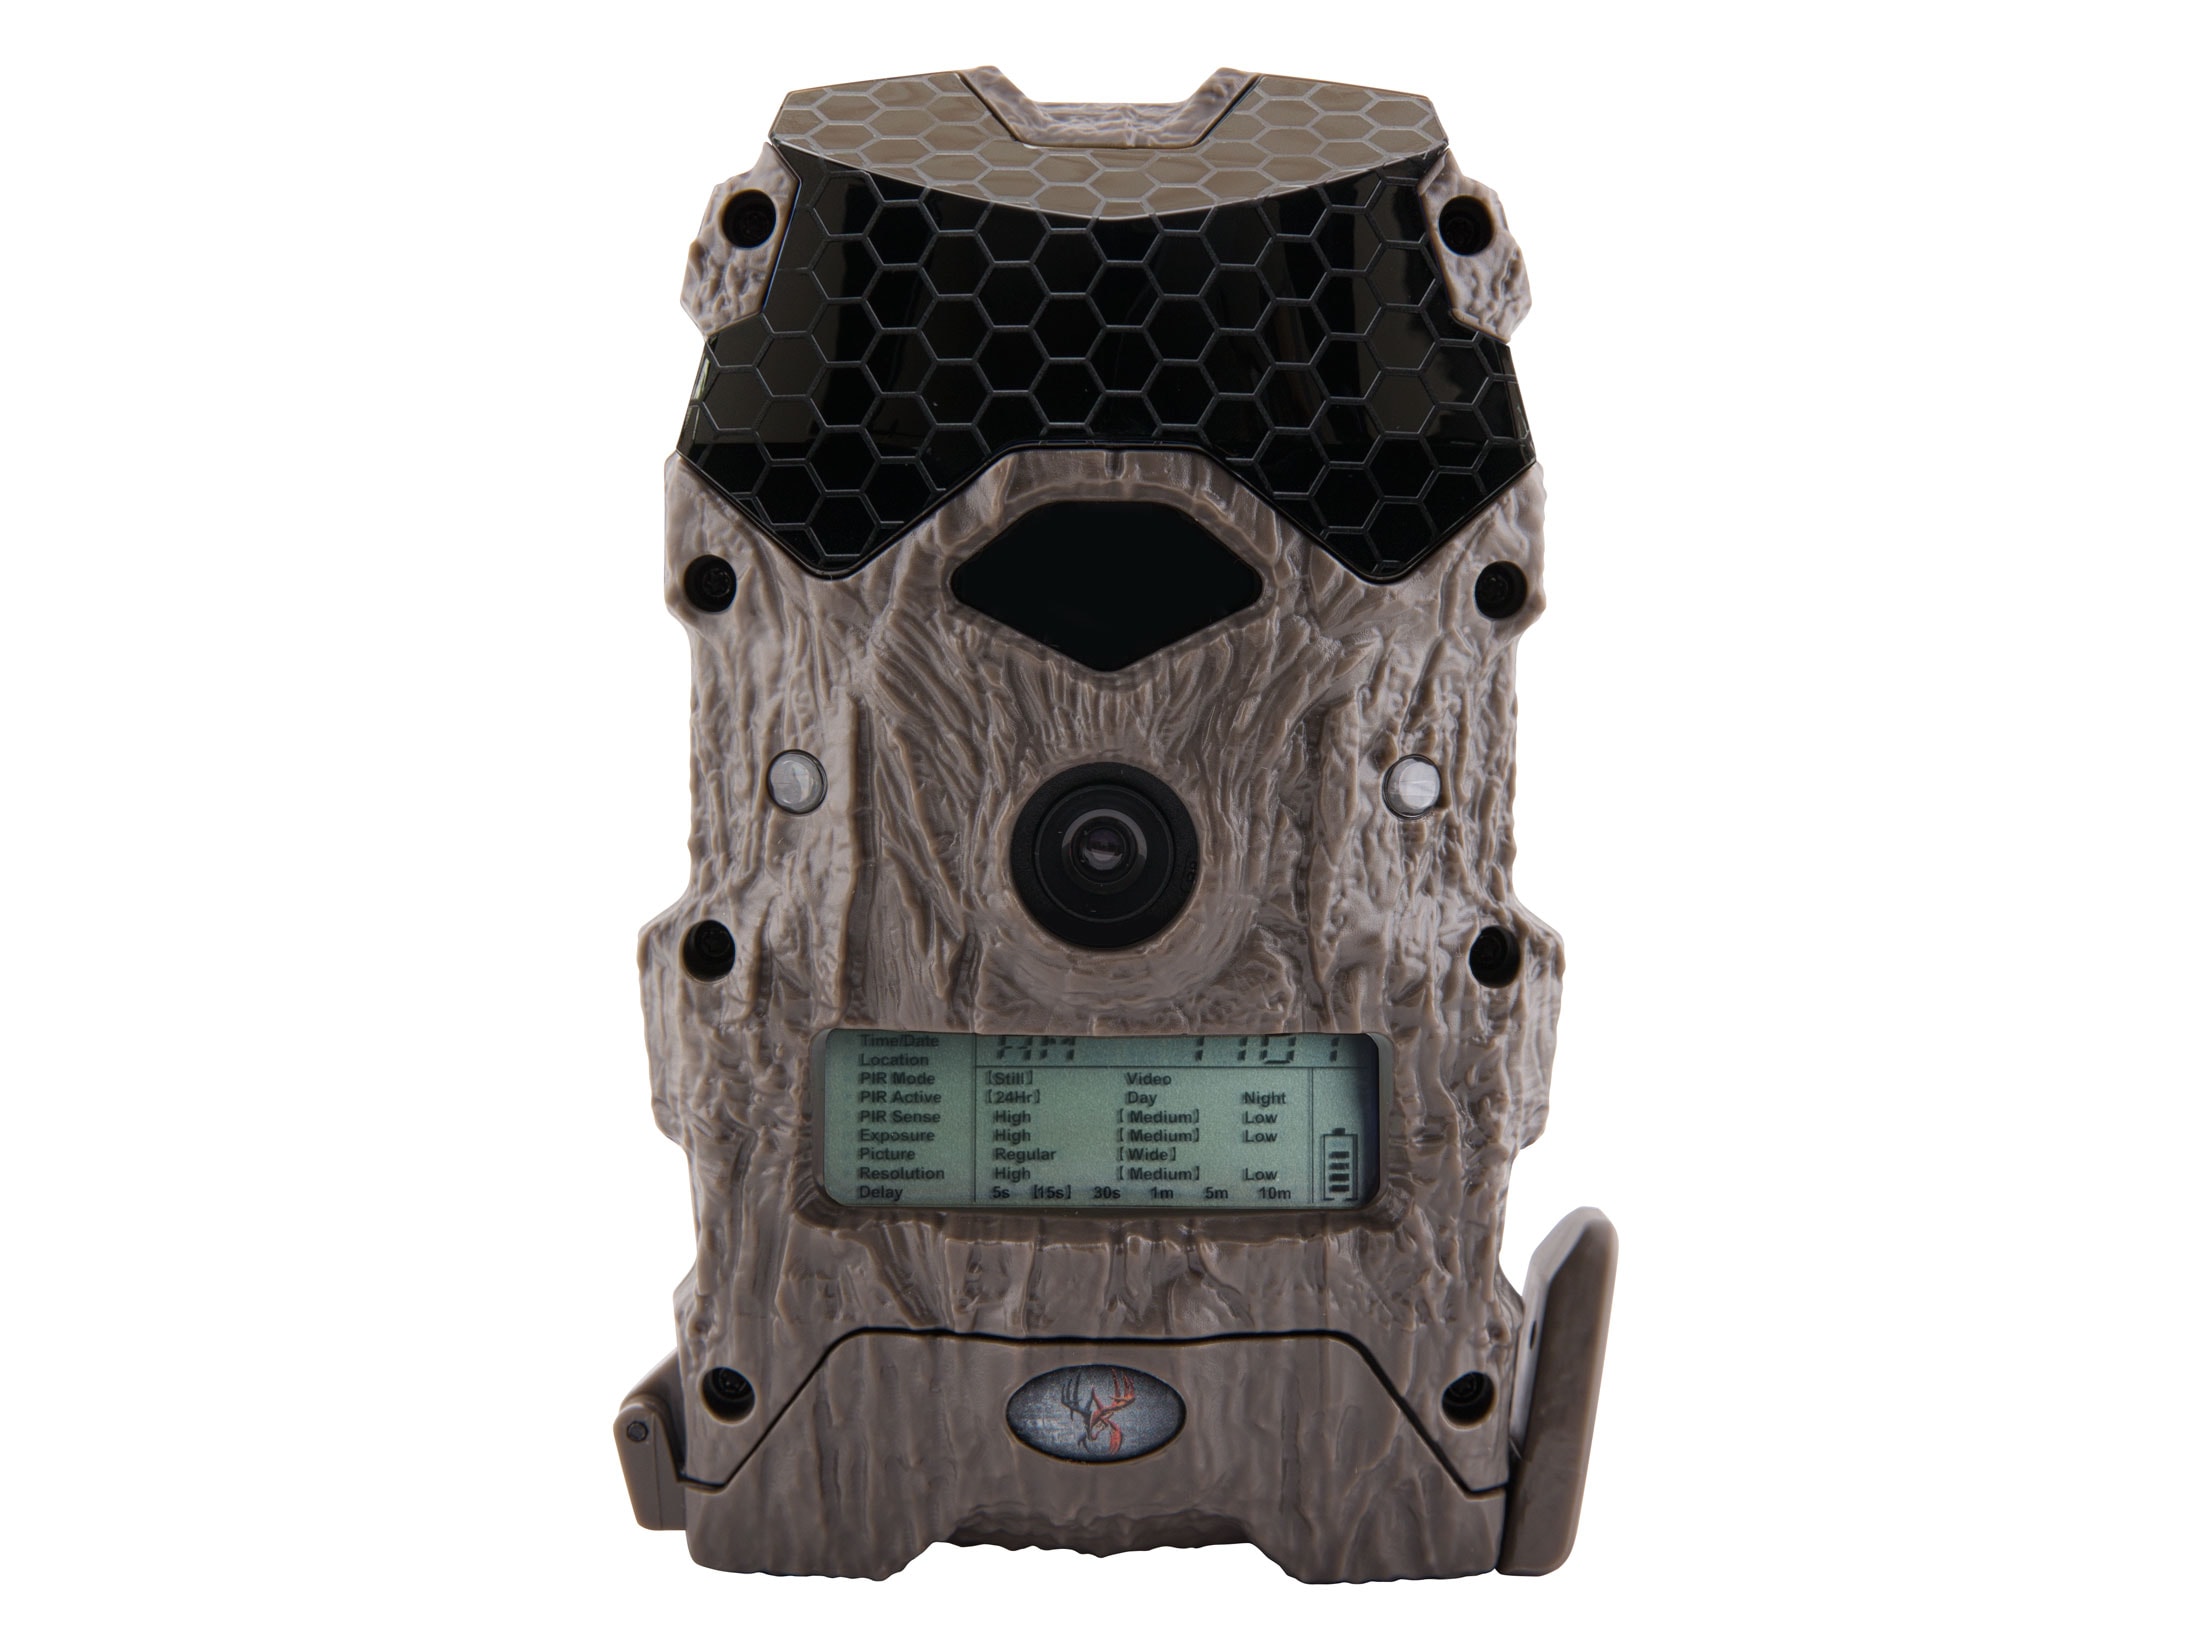 lights out trail cameras